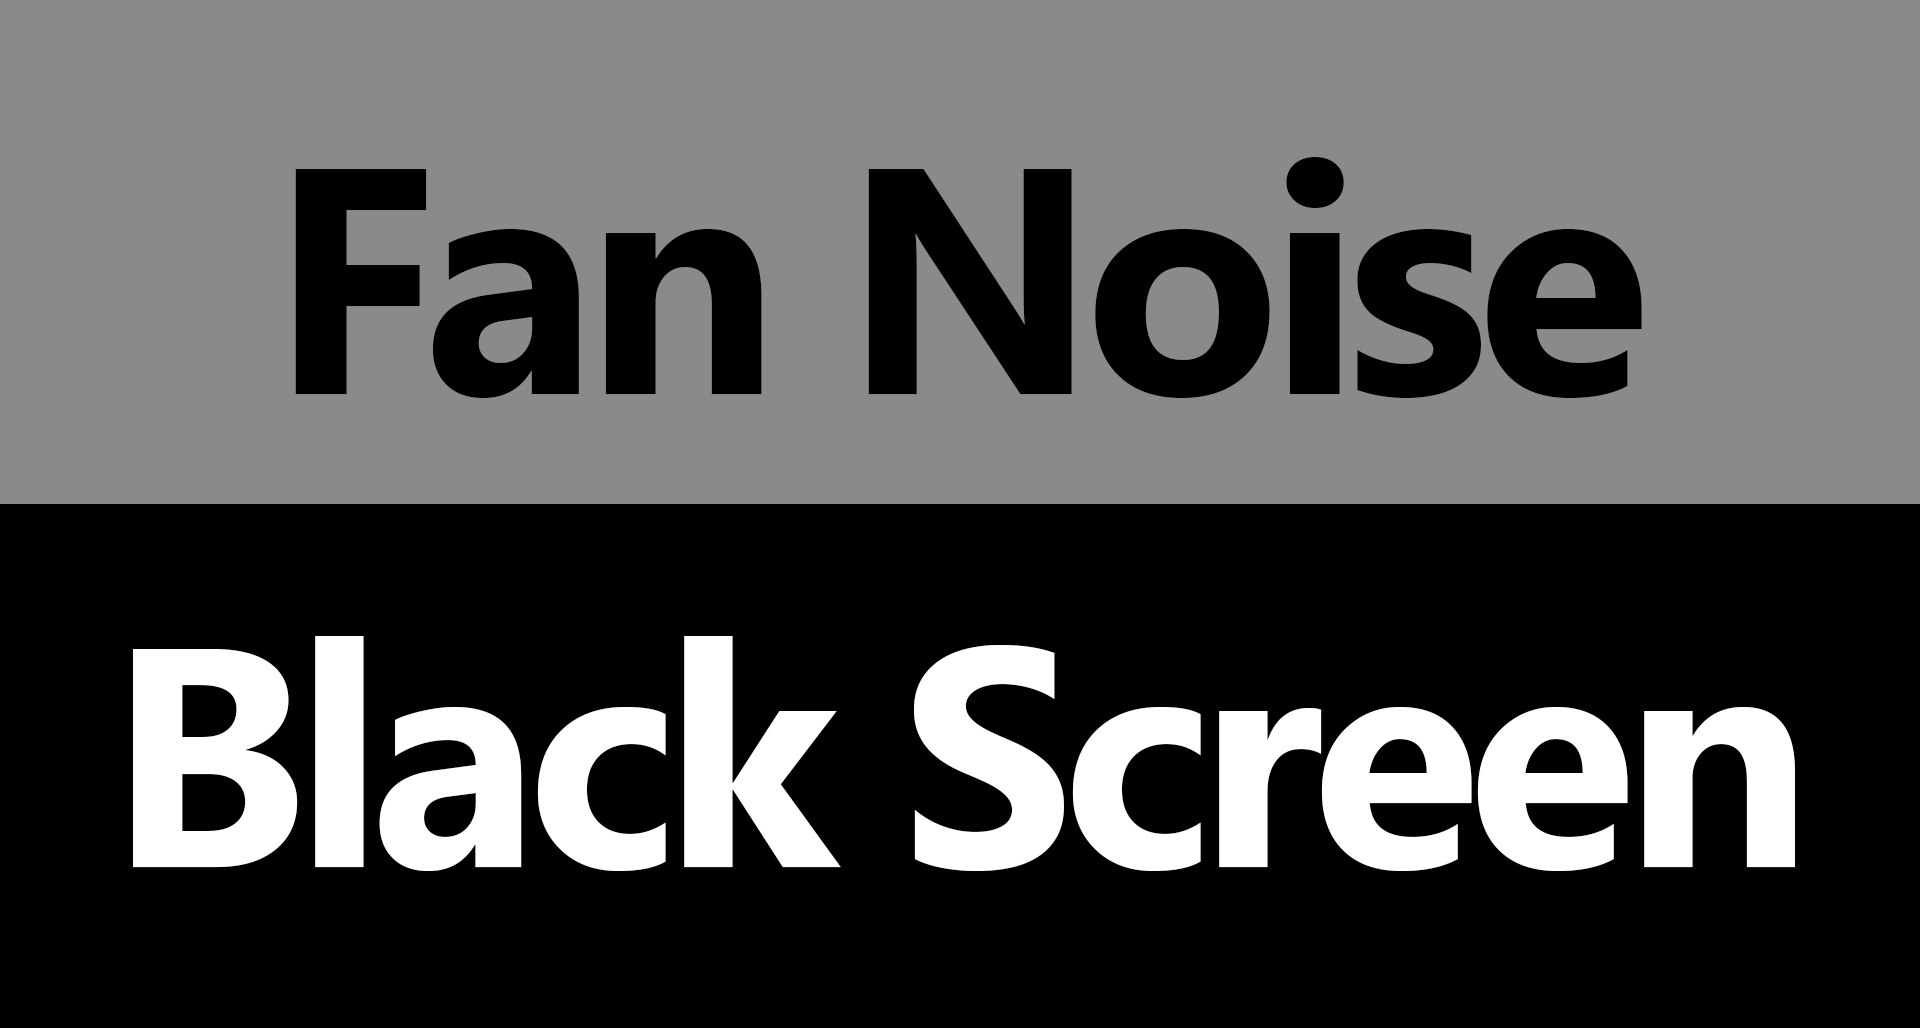 10 hours of a big fan sound for sleeping – black screen